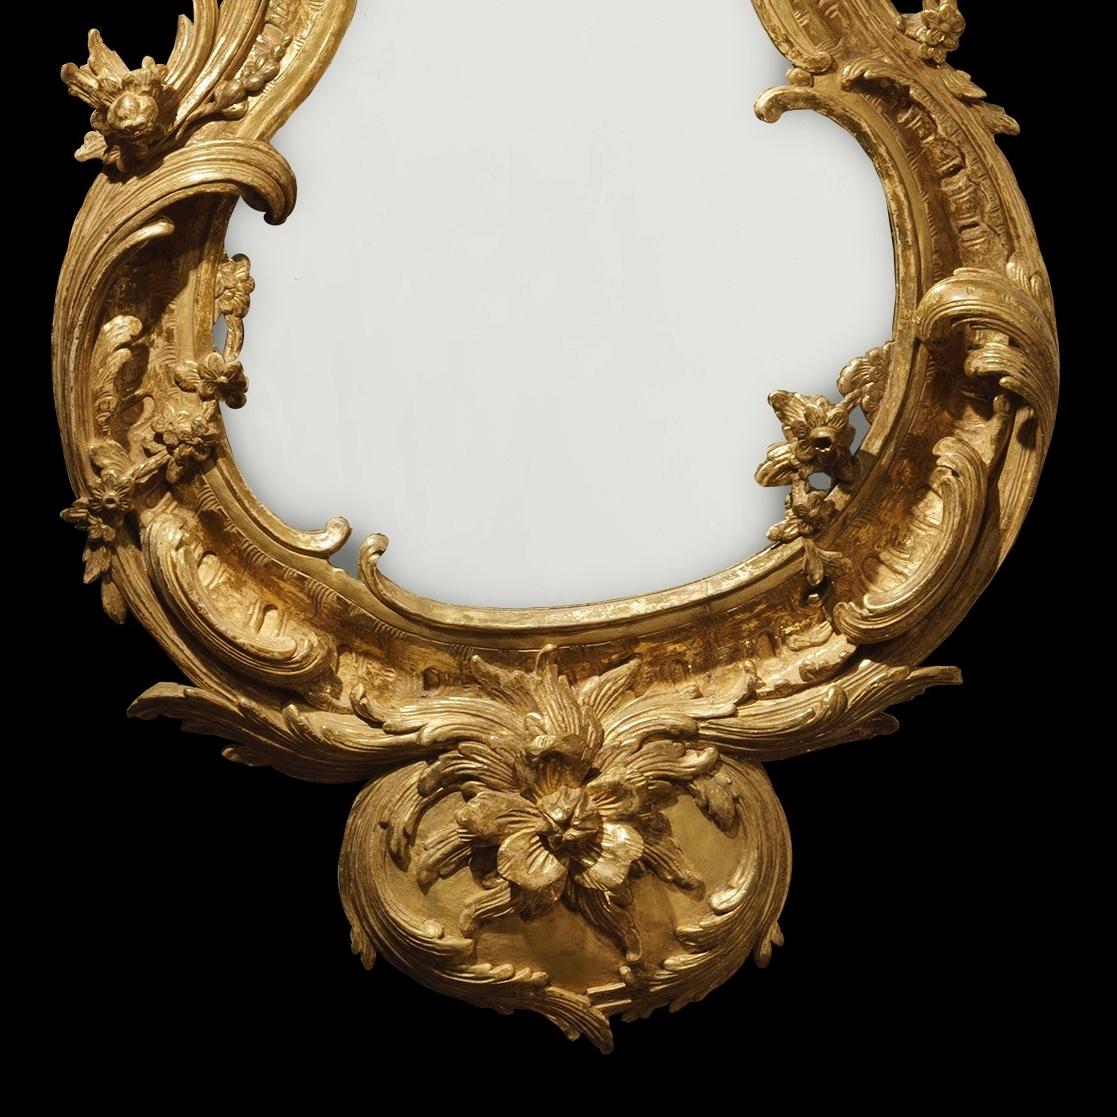 A pair of George II style mirrors

Constructed in carved giltwood, the waisted teardrop shaped mercury plates housed within asymmetrical conforming frames in the George II manner richly carved with scrolling foliates and flowering branchwork;